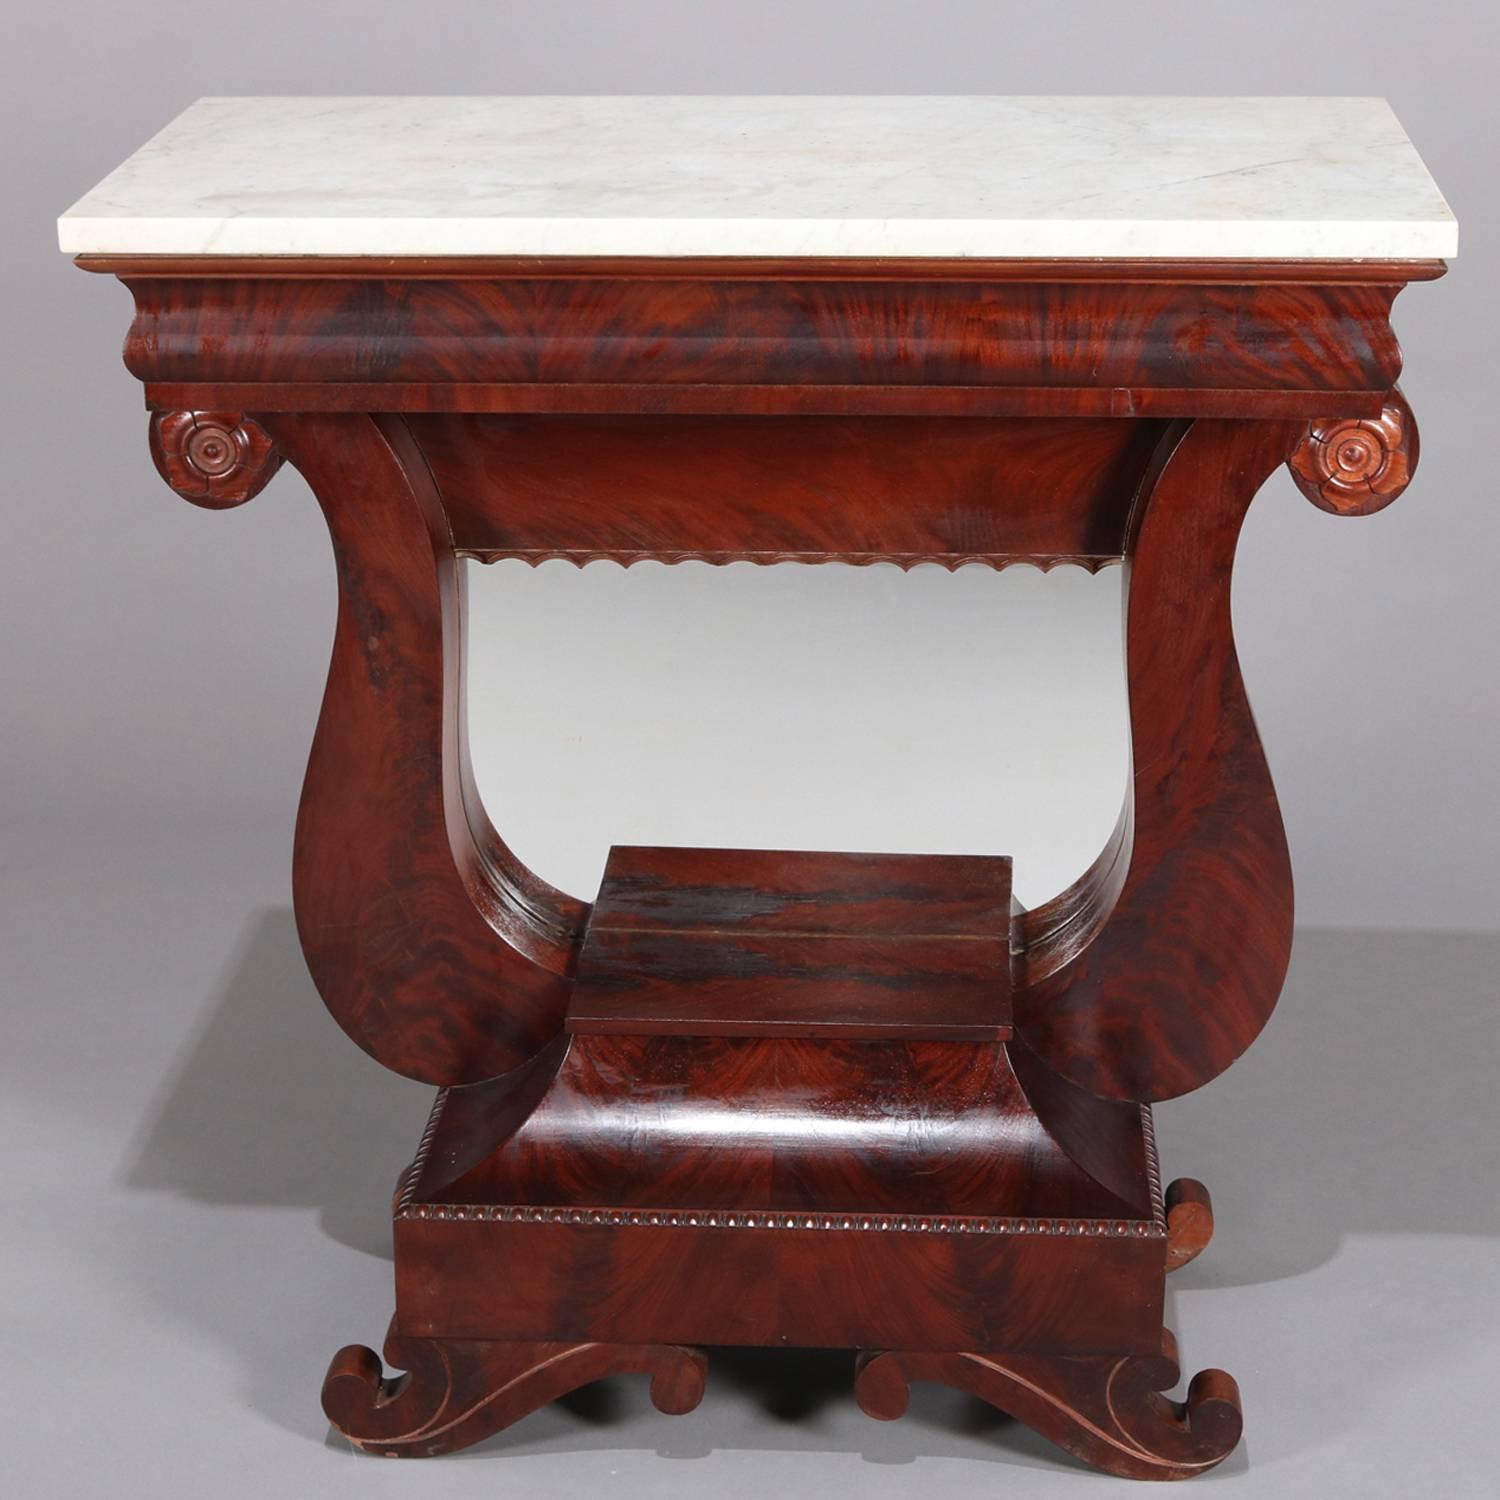 Antique American Empire marble-top pier table features flame mahogany construction in lyre form with rosettes on scroll ends and seated on scroll form feet with scalloped skirting, lower display and mirrored back, circa 1830

Measures - 37.5